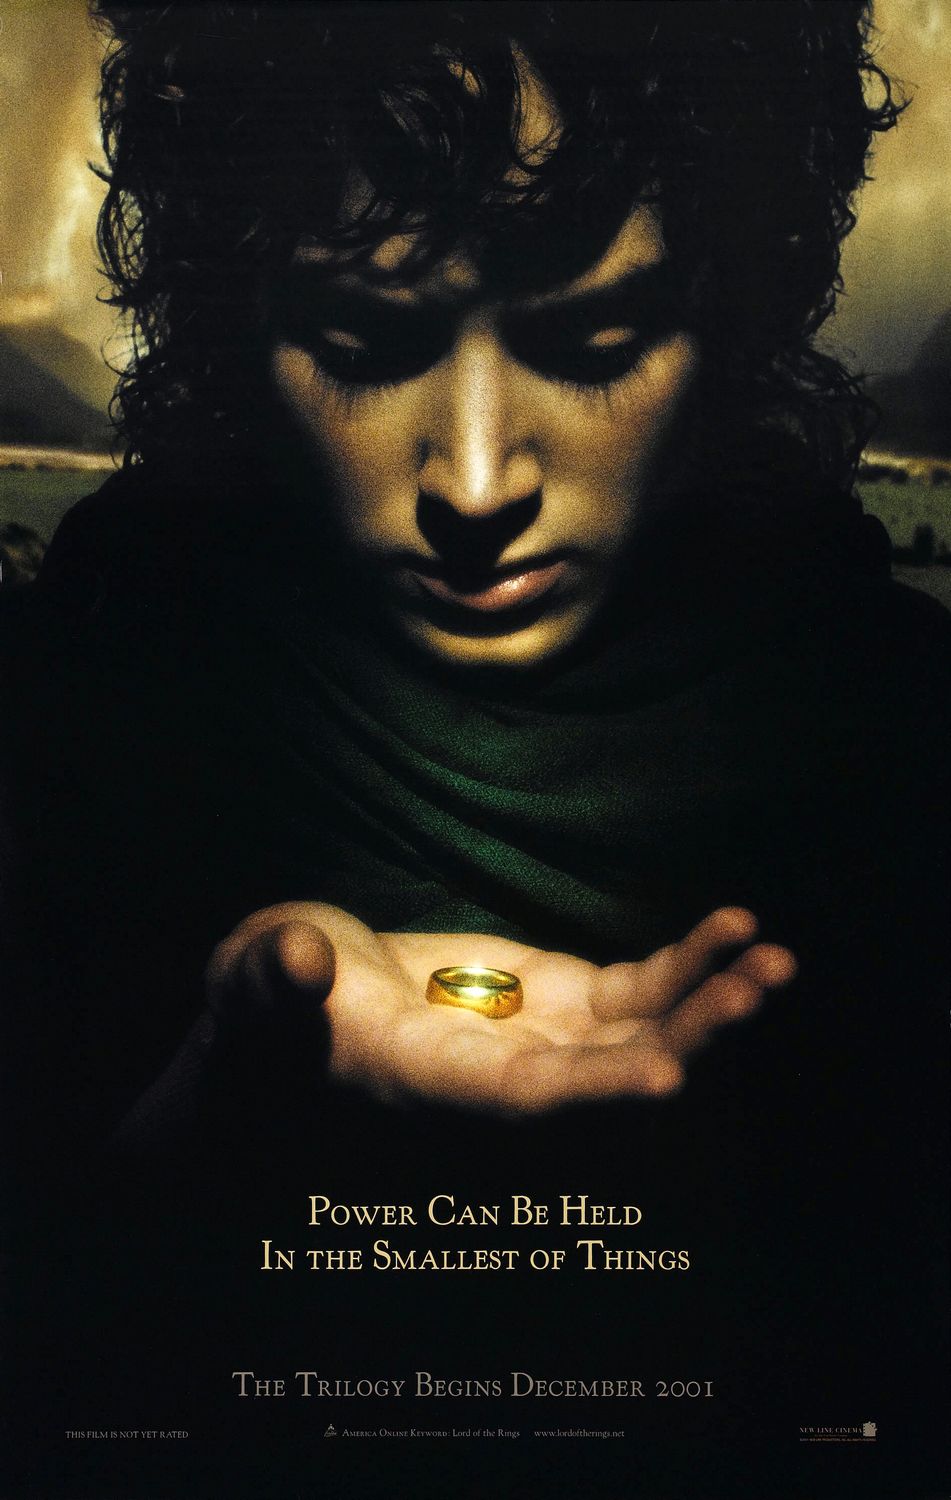 The Lord of the Rings : The Fellowship of the Ring